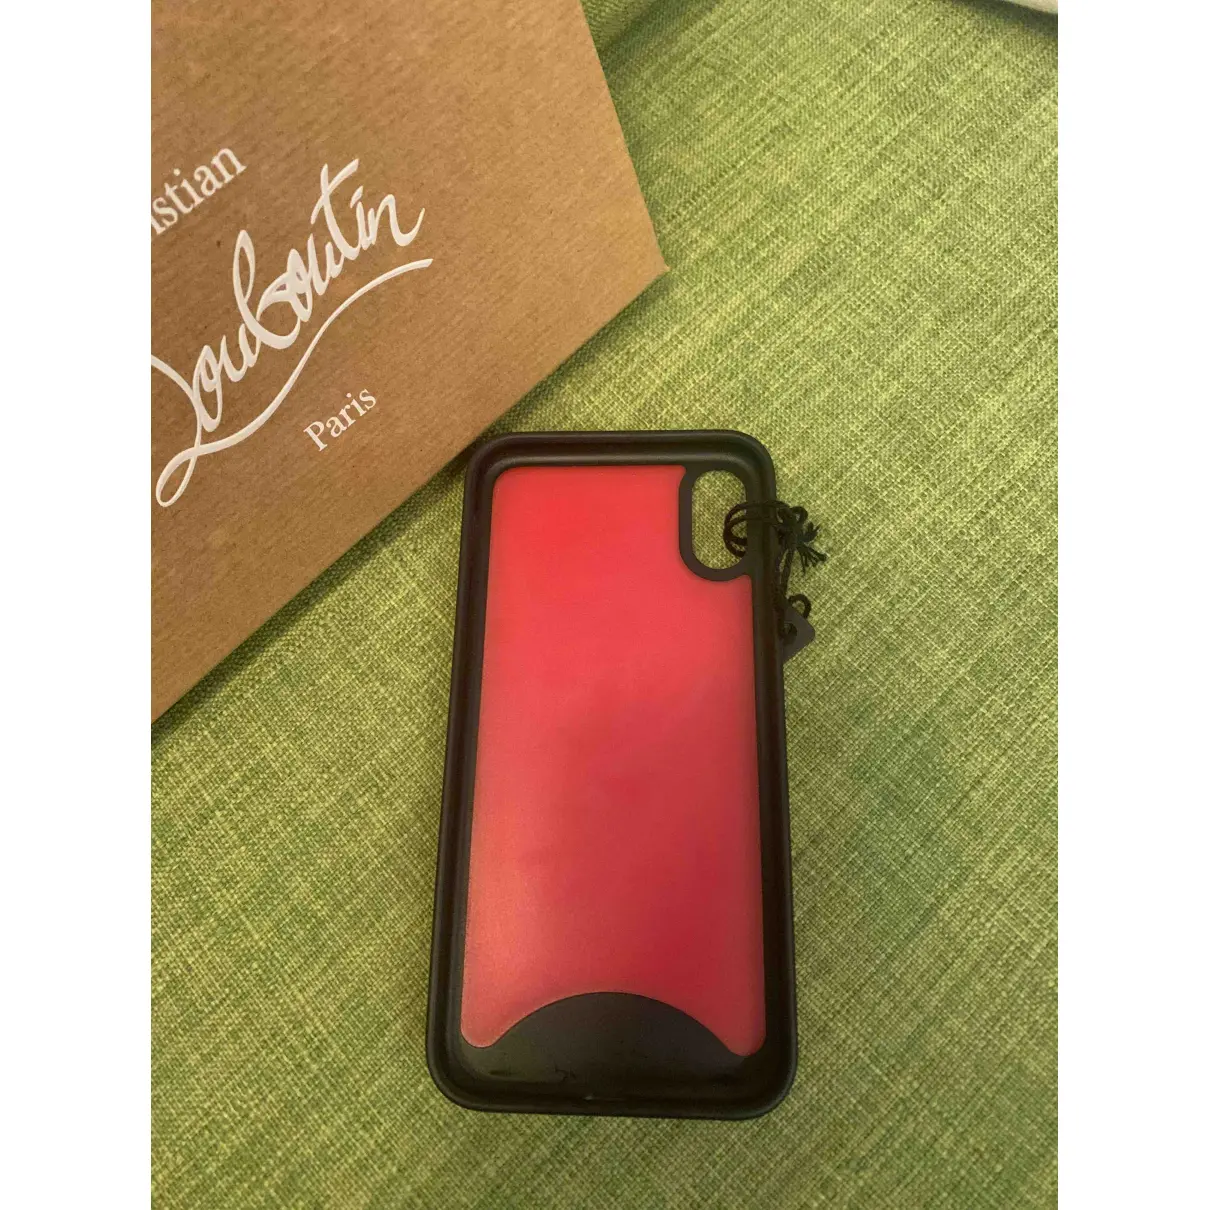 Buy Christian Louboutin Iphone case online